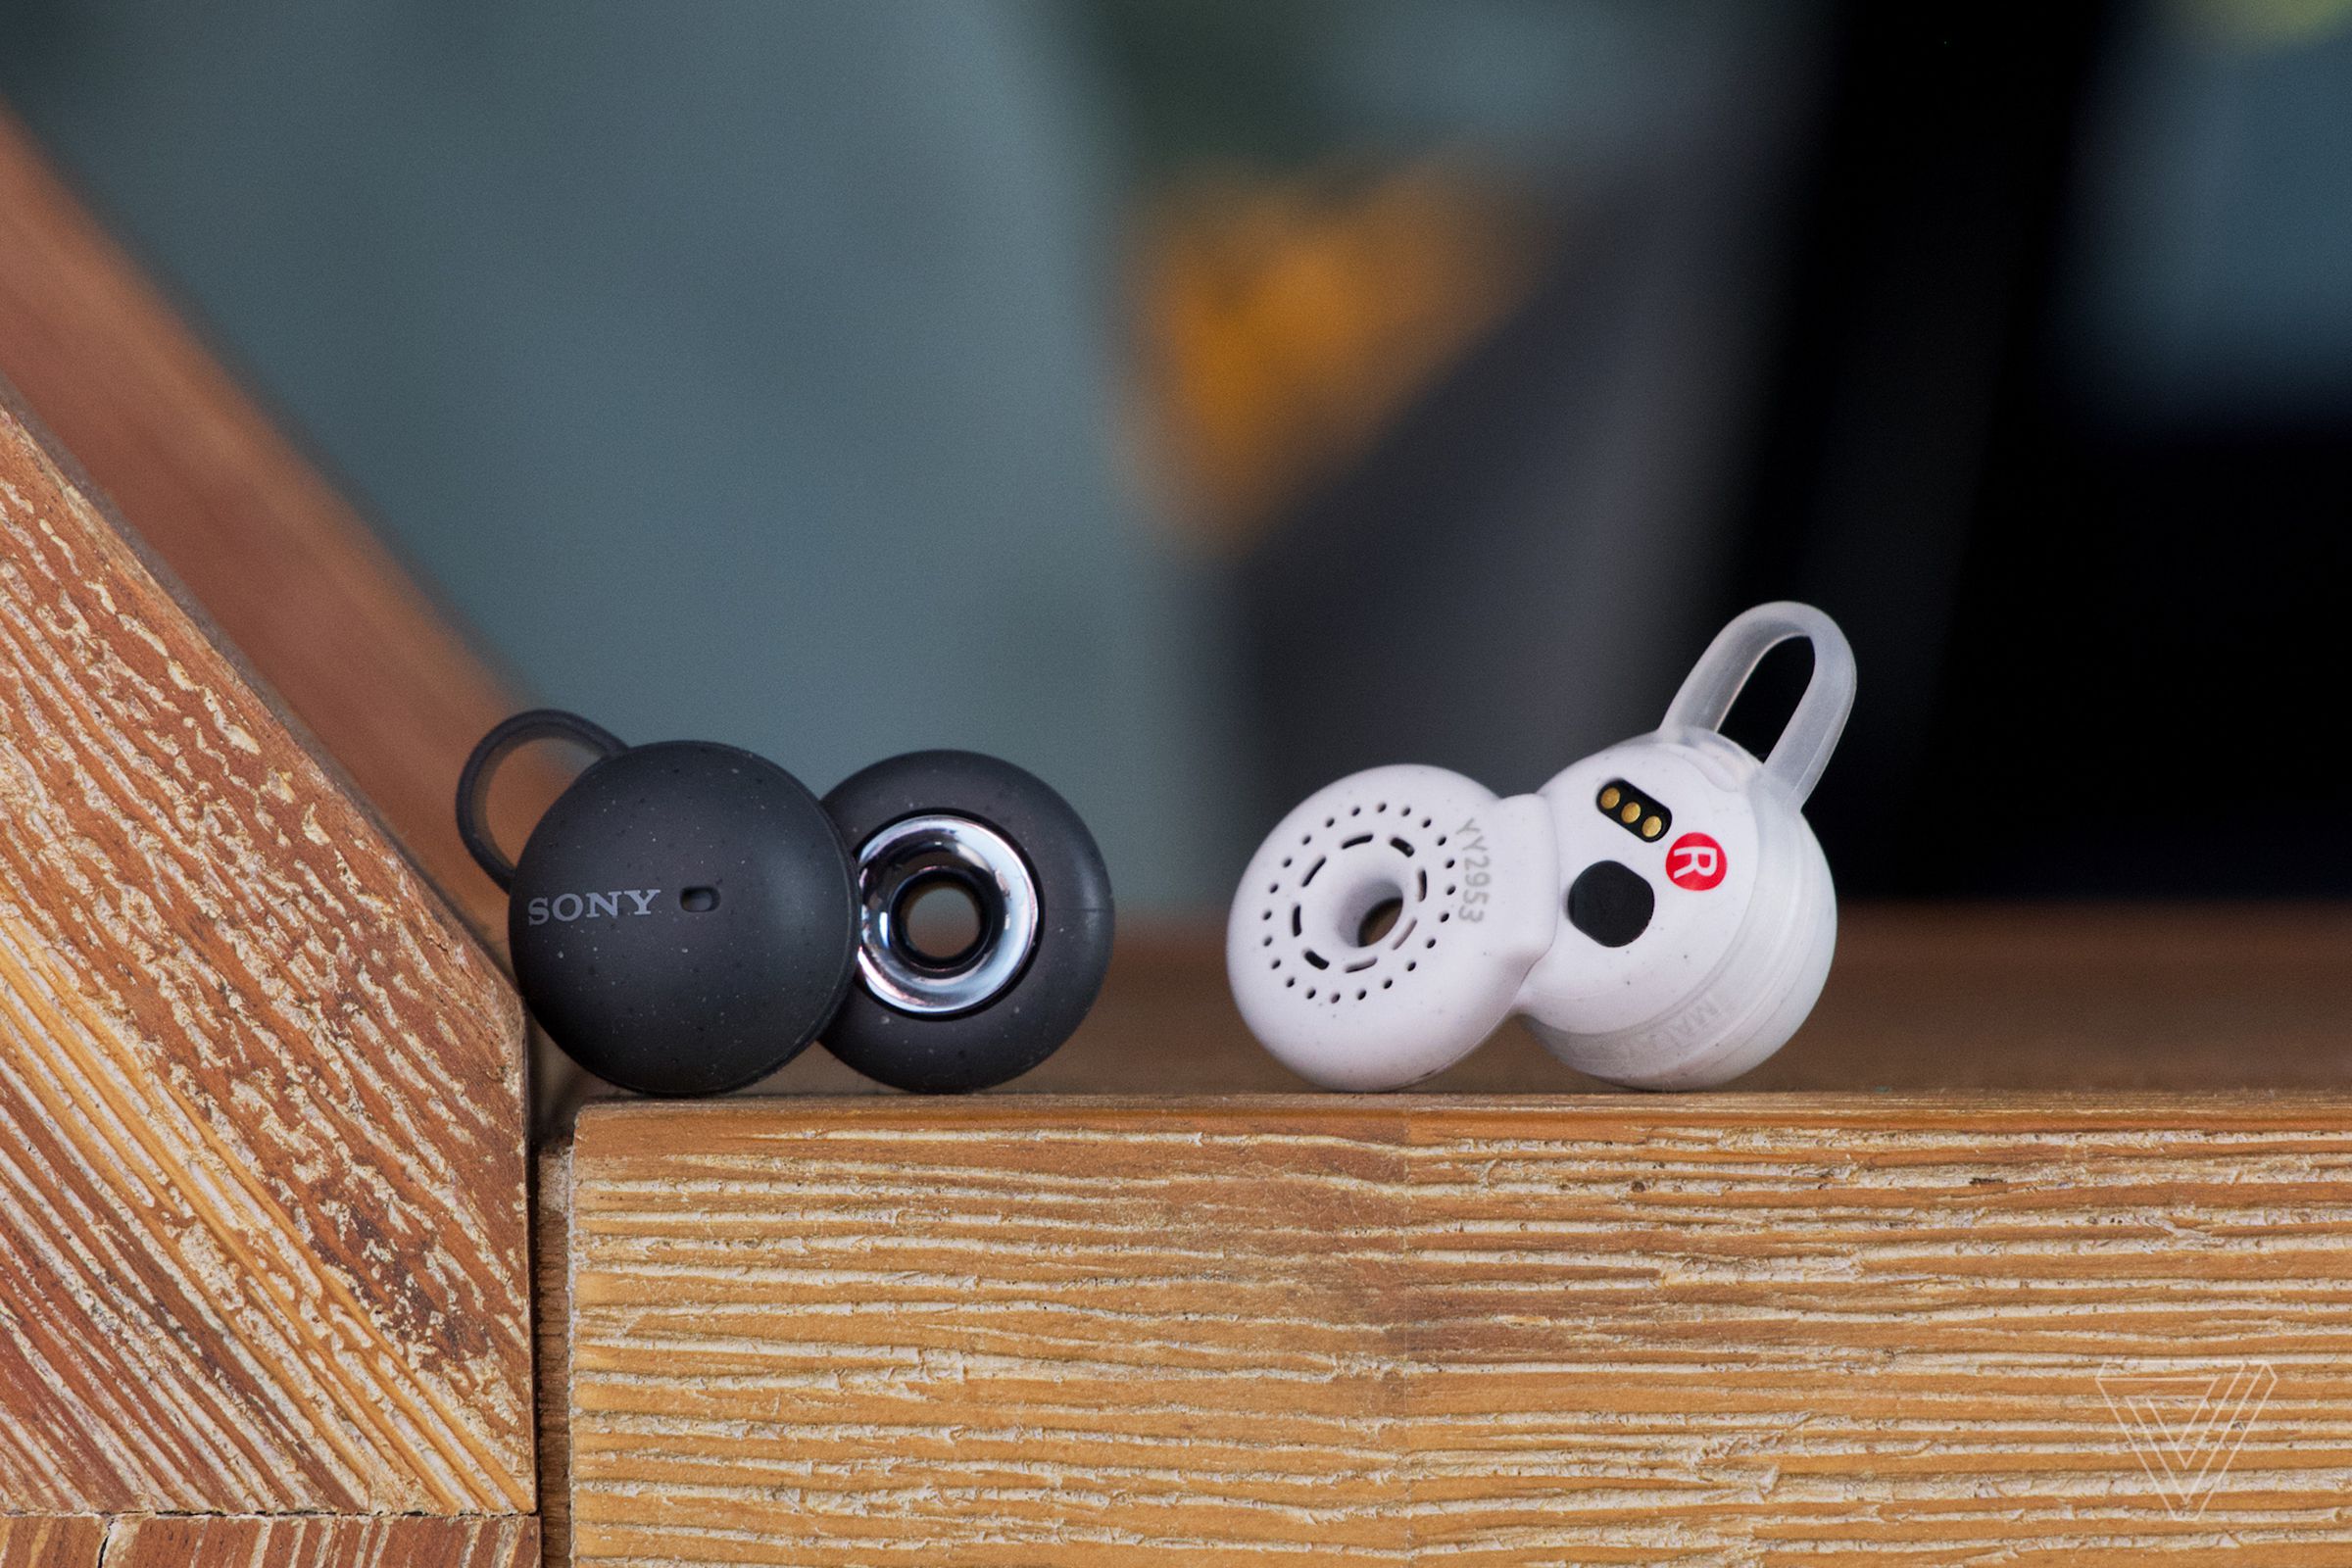 Sony includes several sizes of support arcs to keep the LinkBuds securely in your ears.